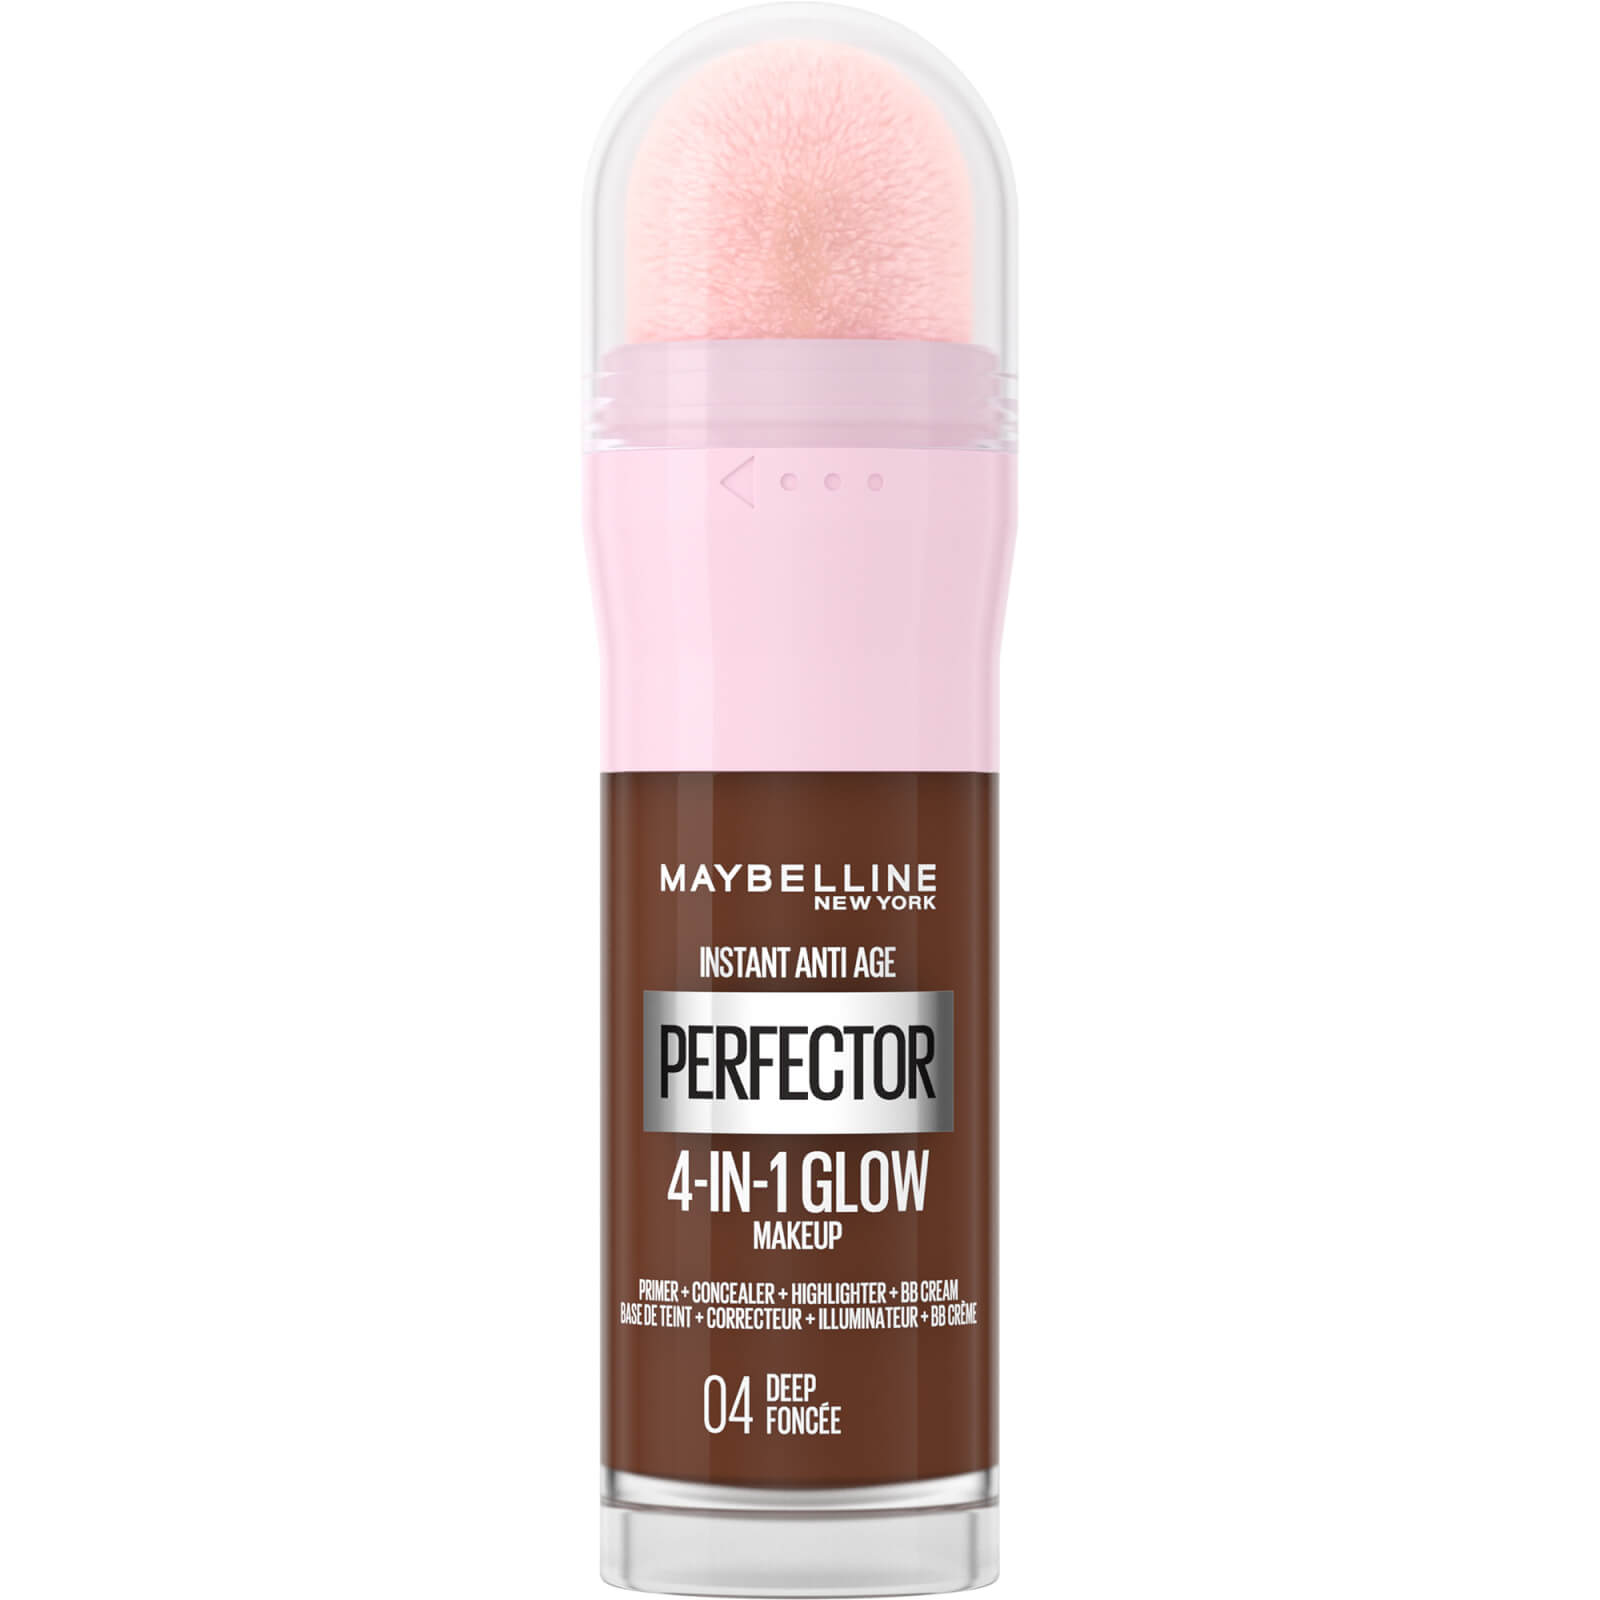 Maybelline instant Anti Age Perfector 4-in-1 Glow Concealer 118ml (Various Shades) - Deep